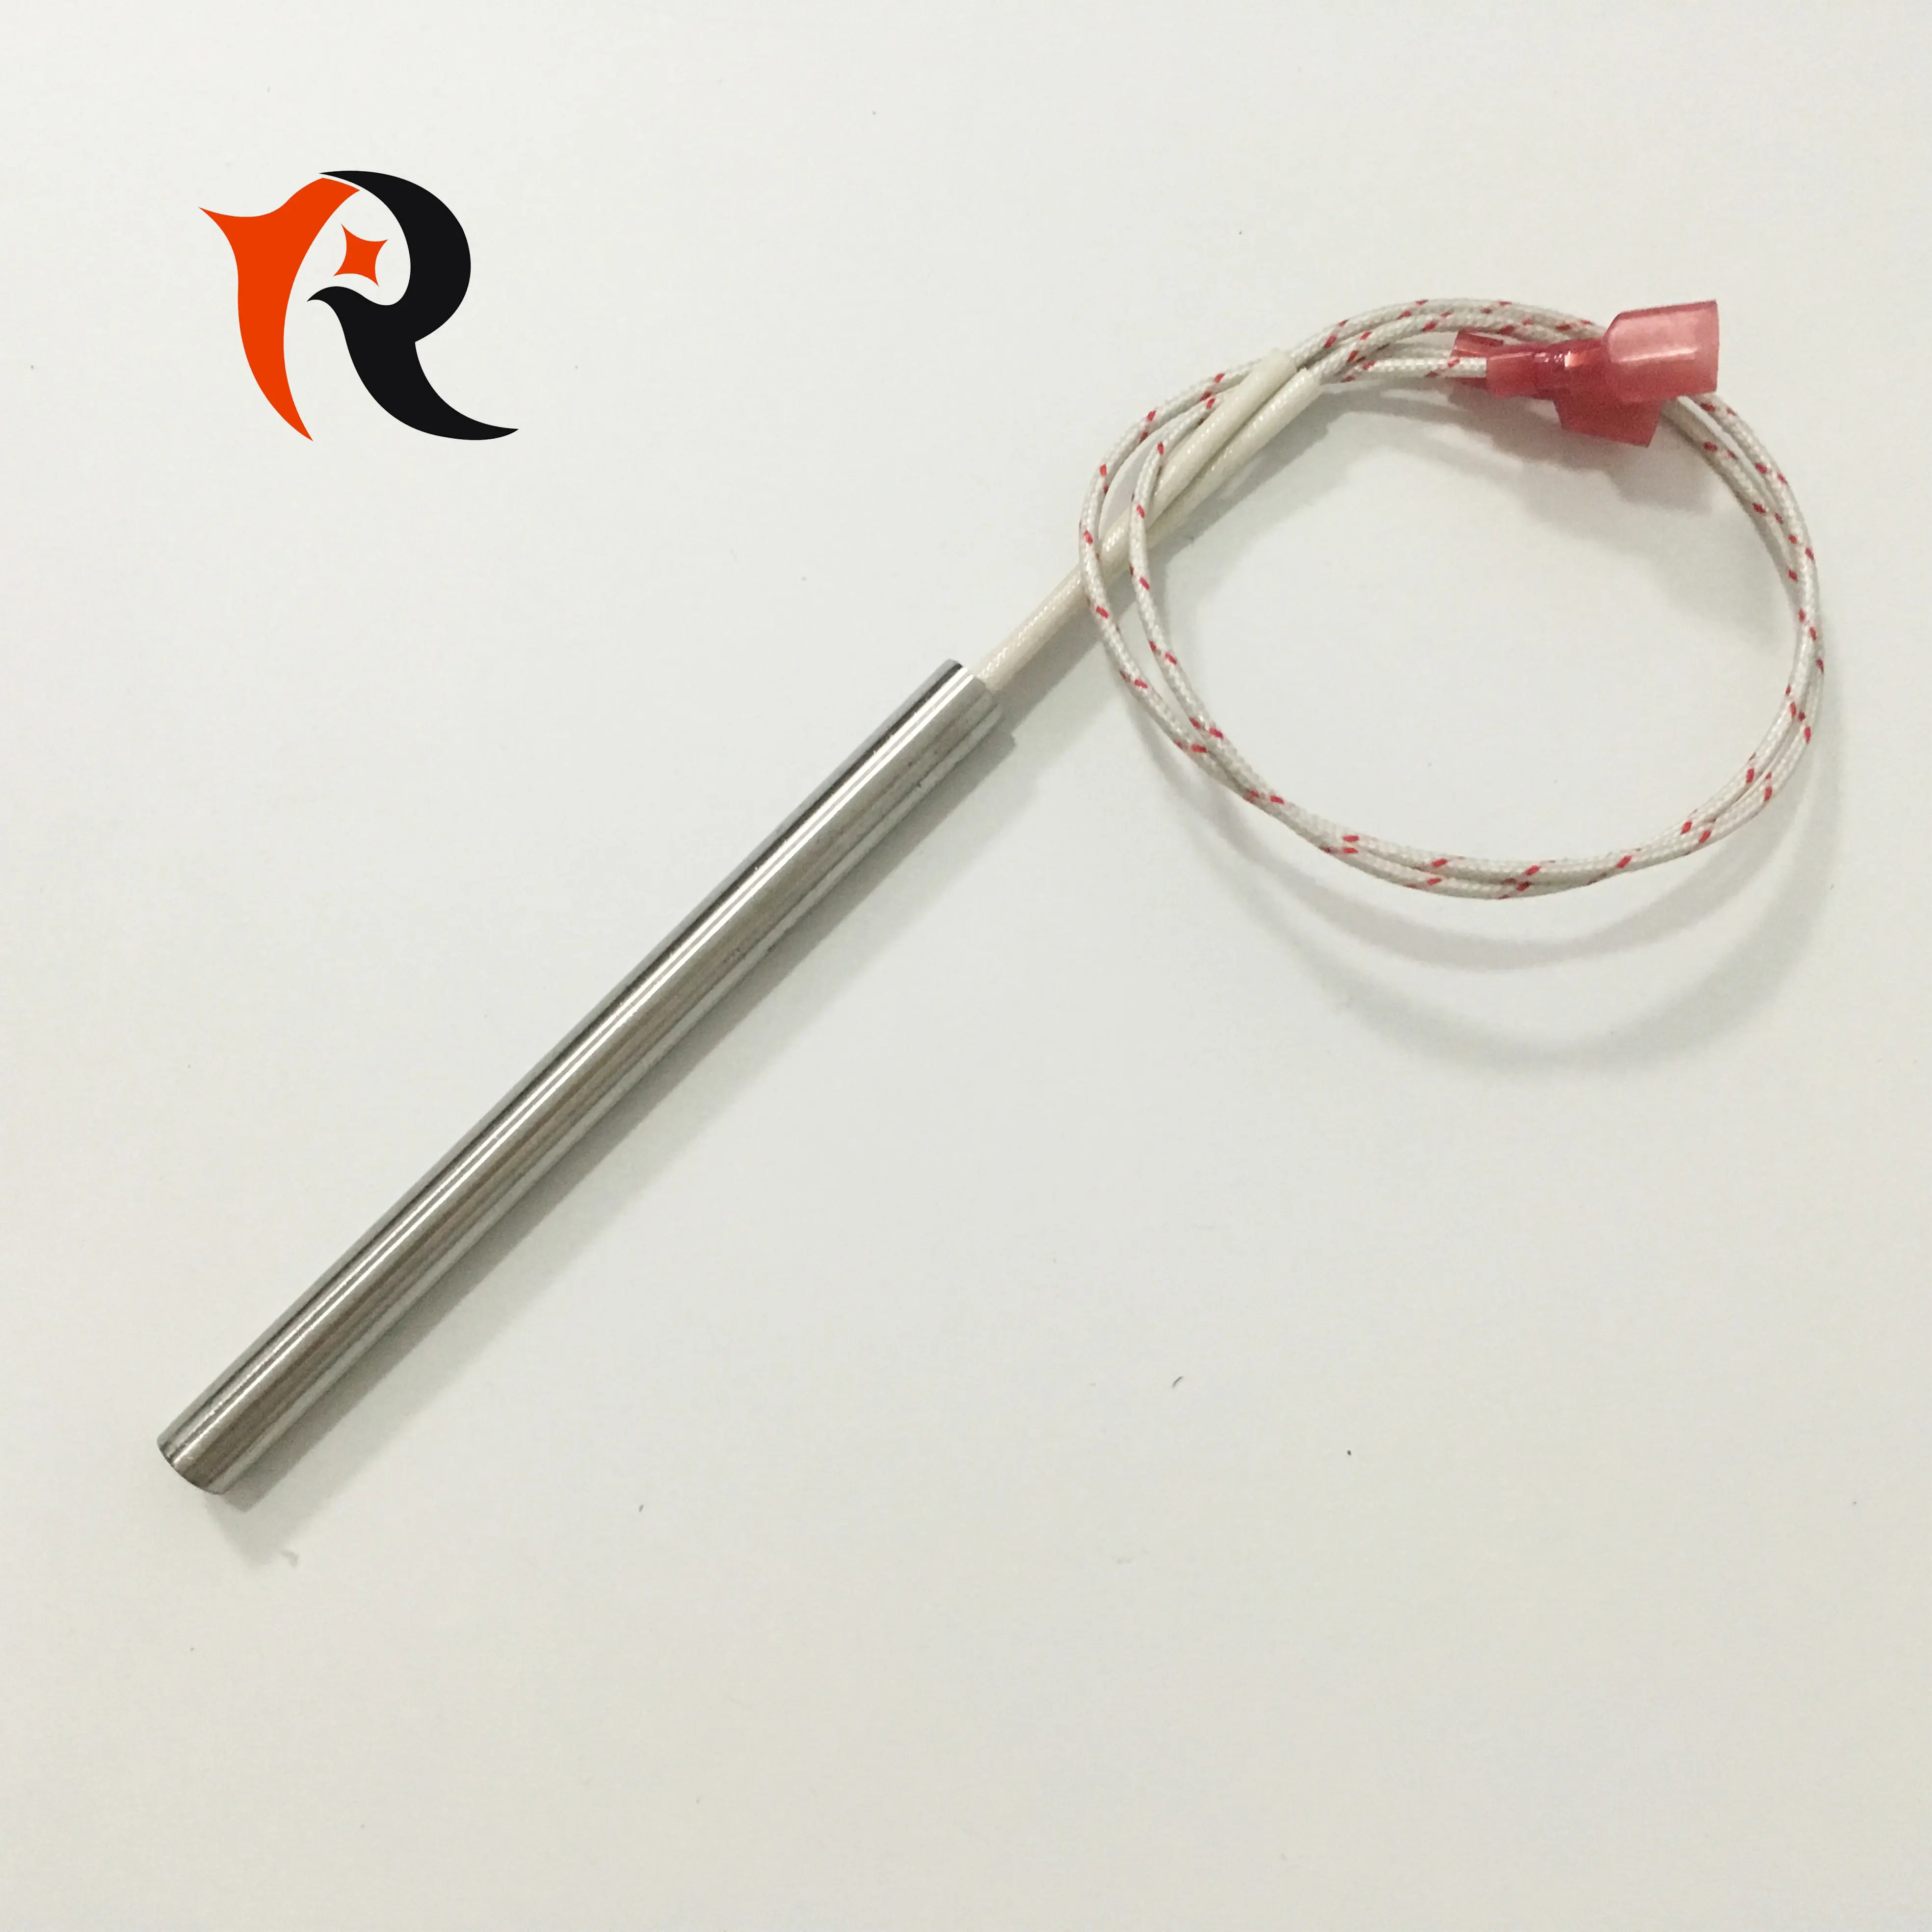 240v 300w Stainless Steel High Density Immersion Electric Water Heating Element Cartridge Heater